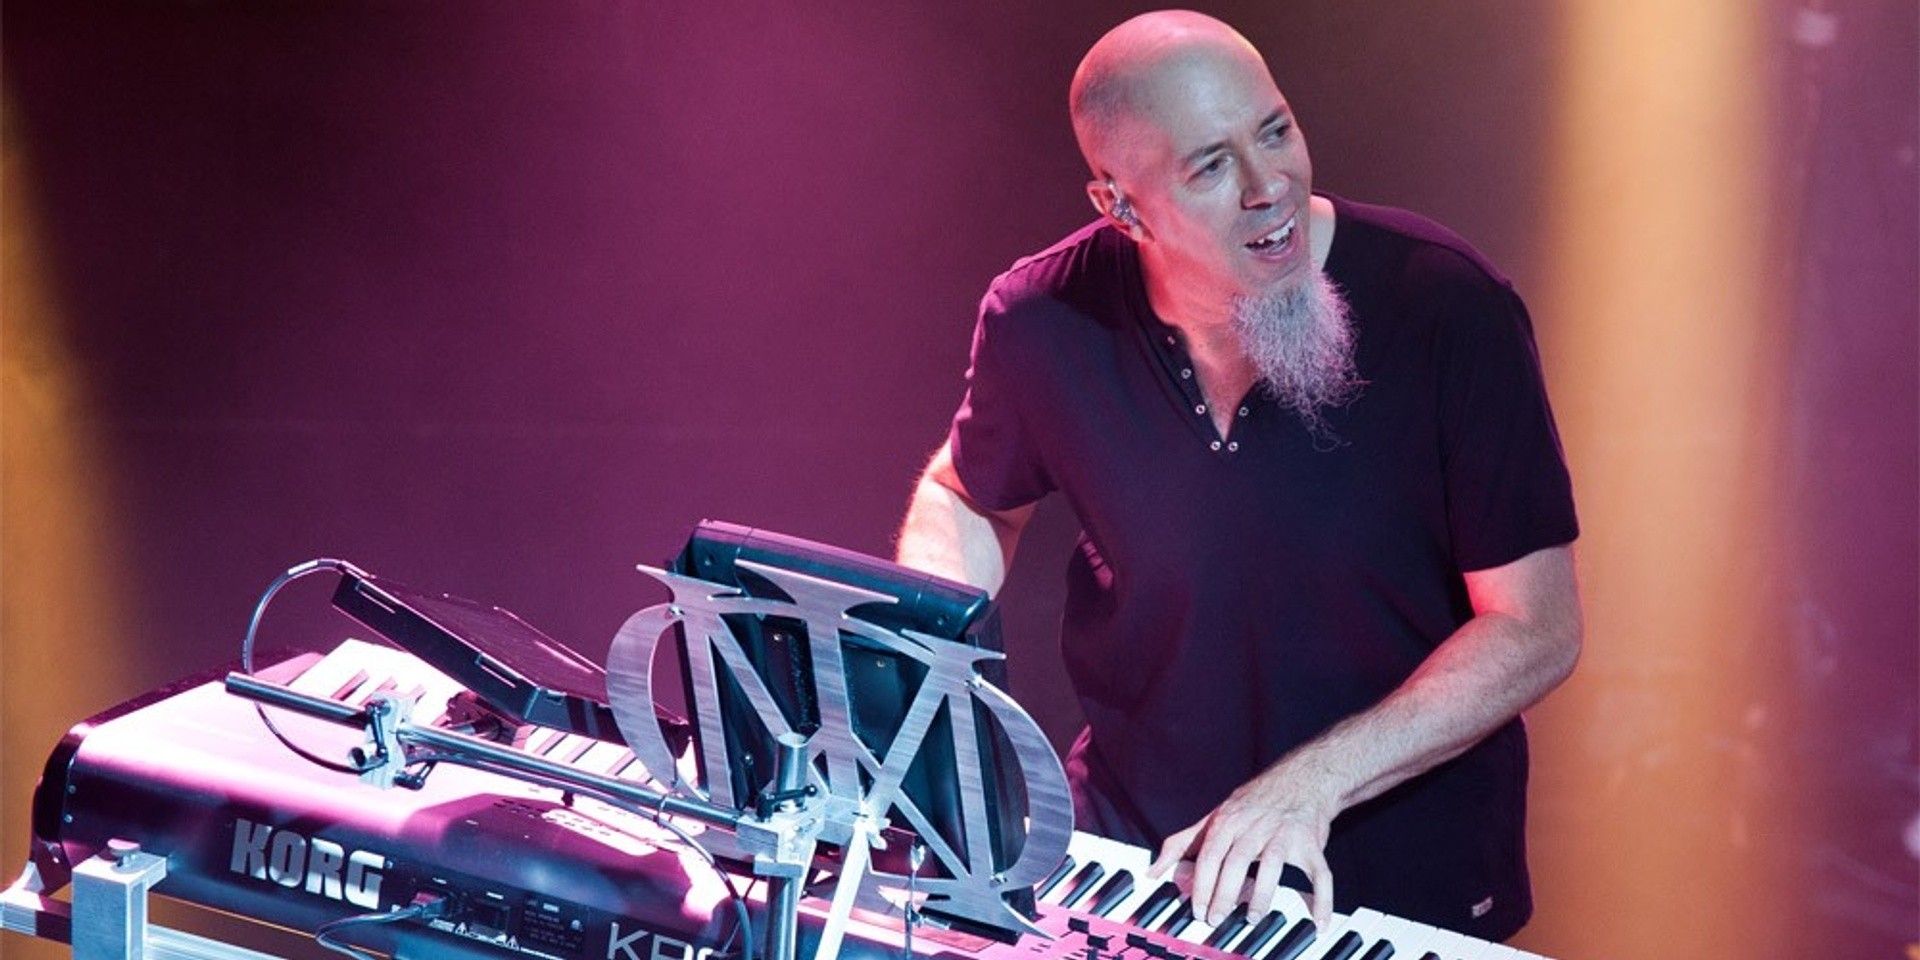 Dream Theater's Jordan Rudess to perform solo show in Singapore 